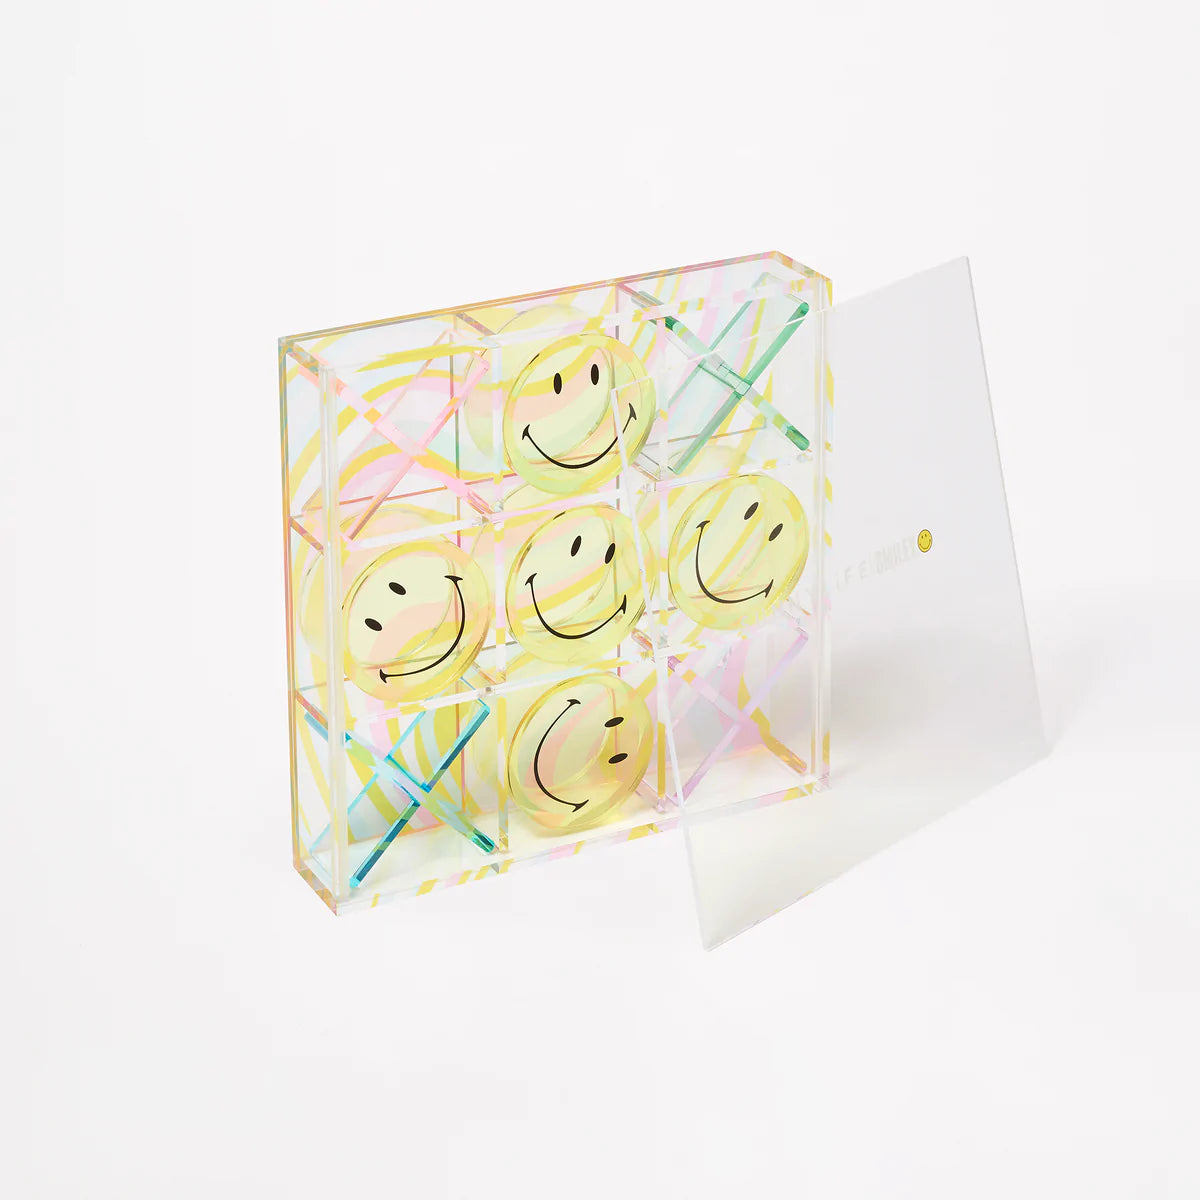 Smiley Lucite Tic Tac Toe